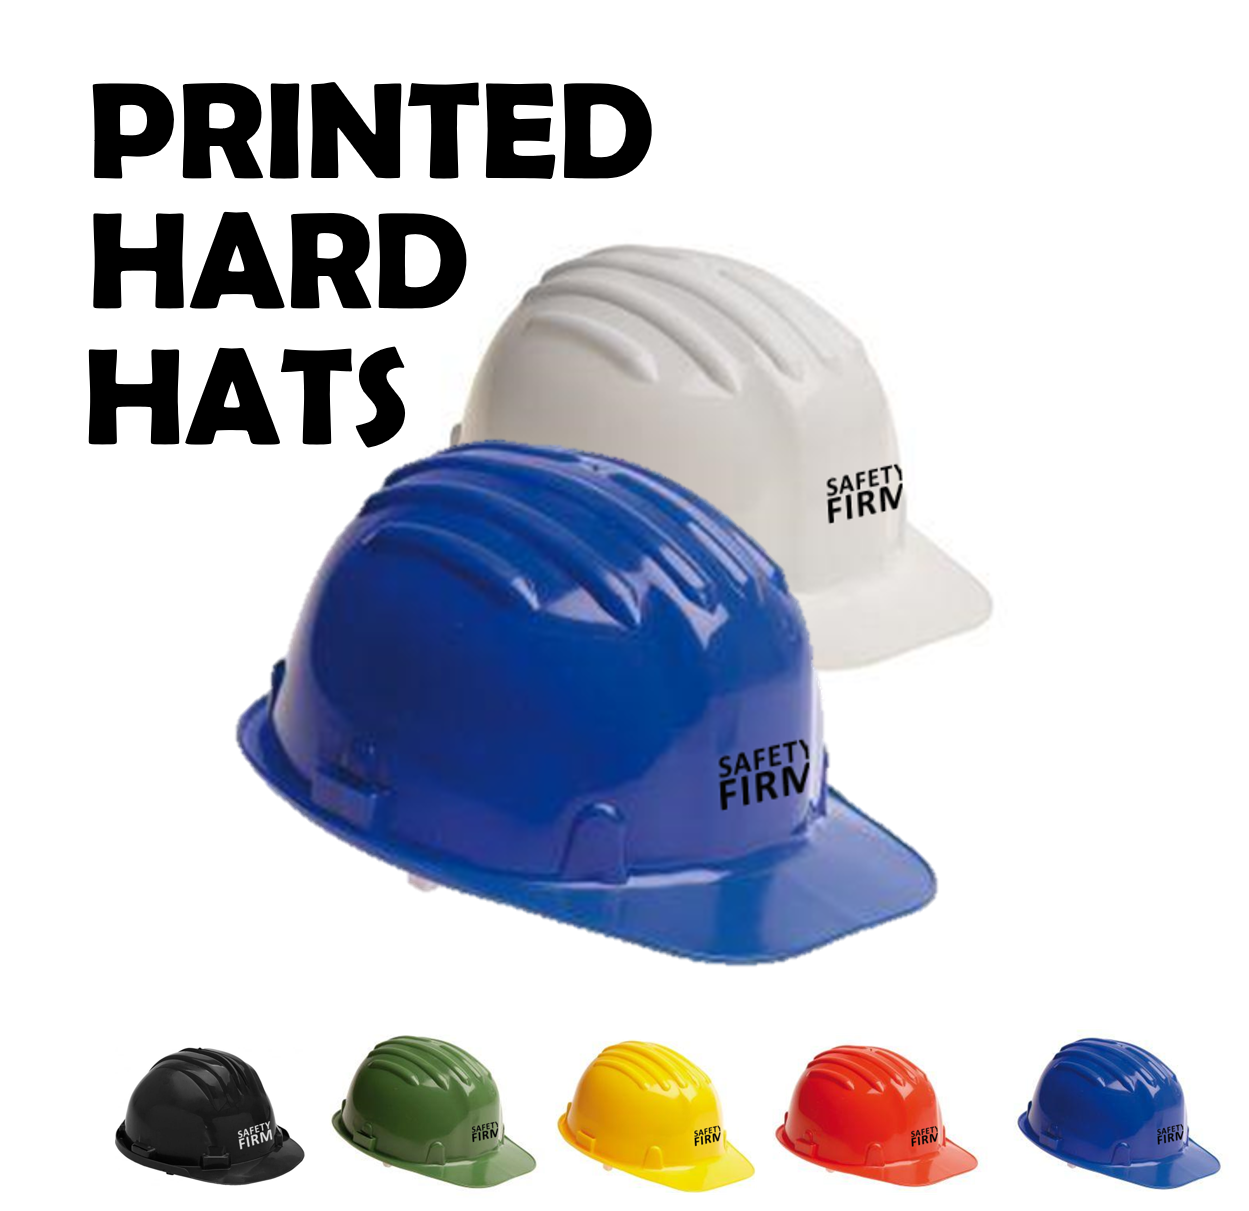 List 98+ Pictures Hard Hats And Safety Vests Near Me Full HD, 2k, 4k